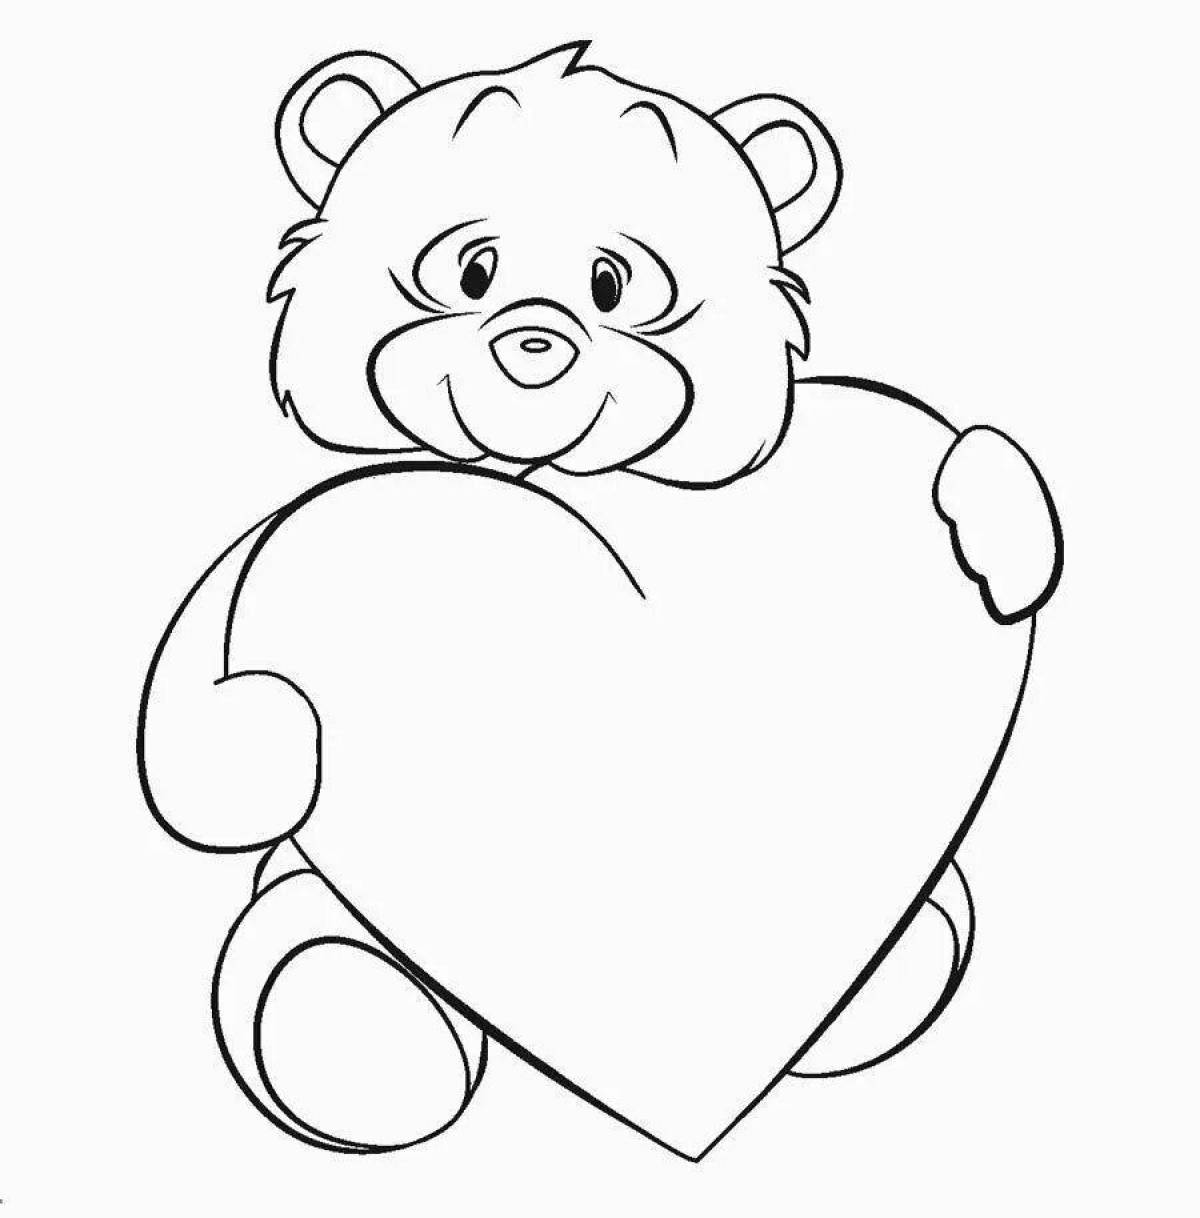 Coloring book smiling bear with a heart